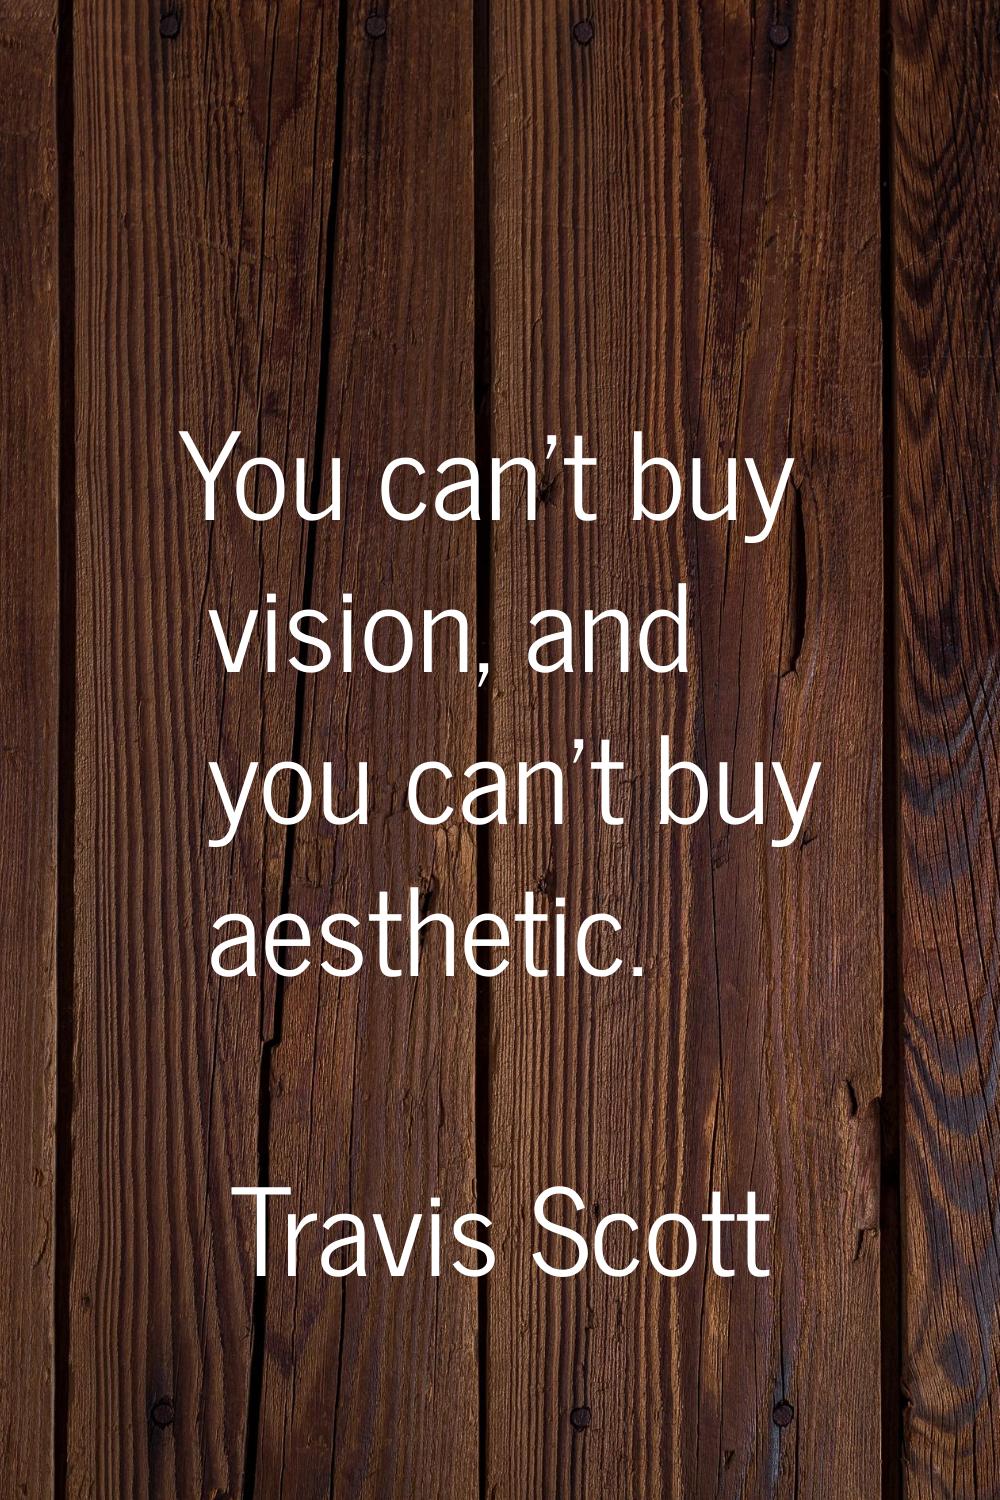 You can't buy vision, and you can't buy aesthetic.